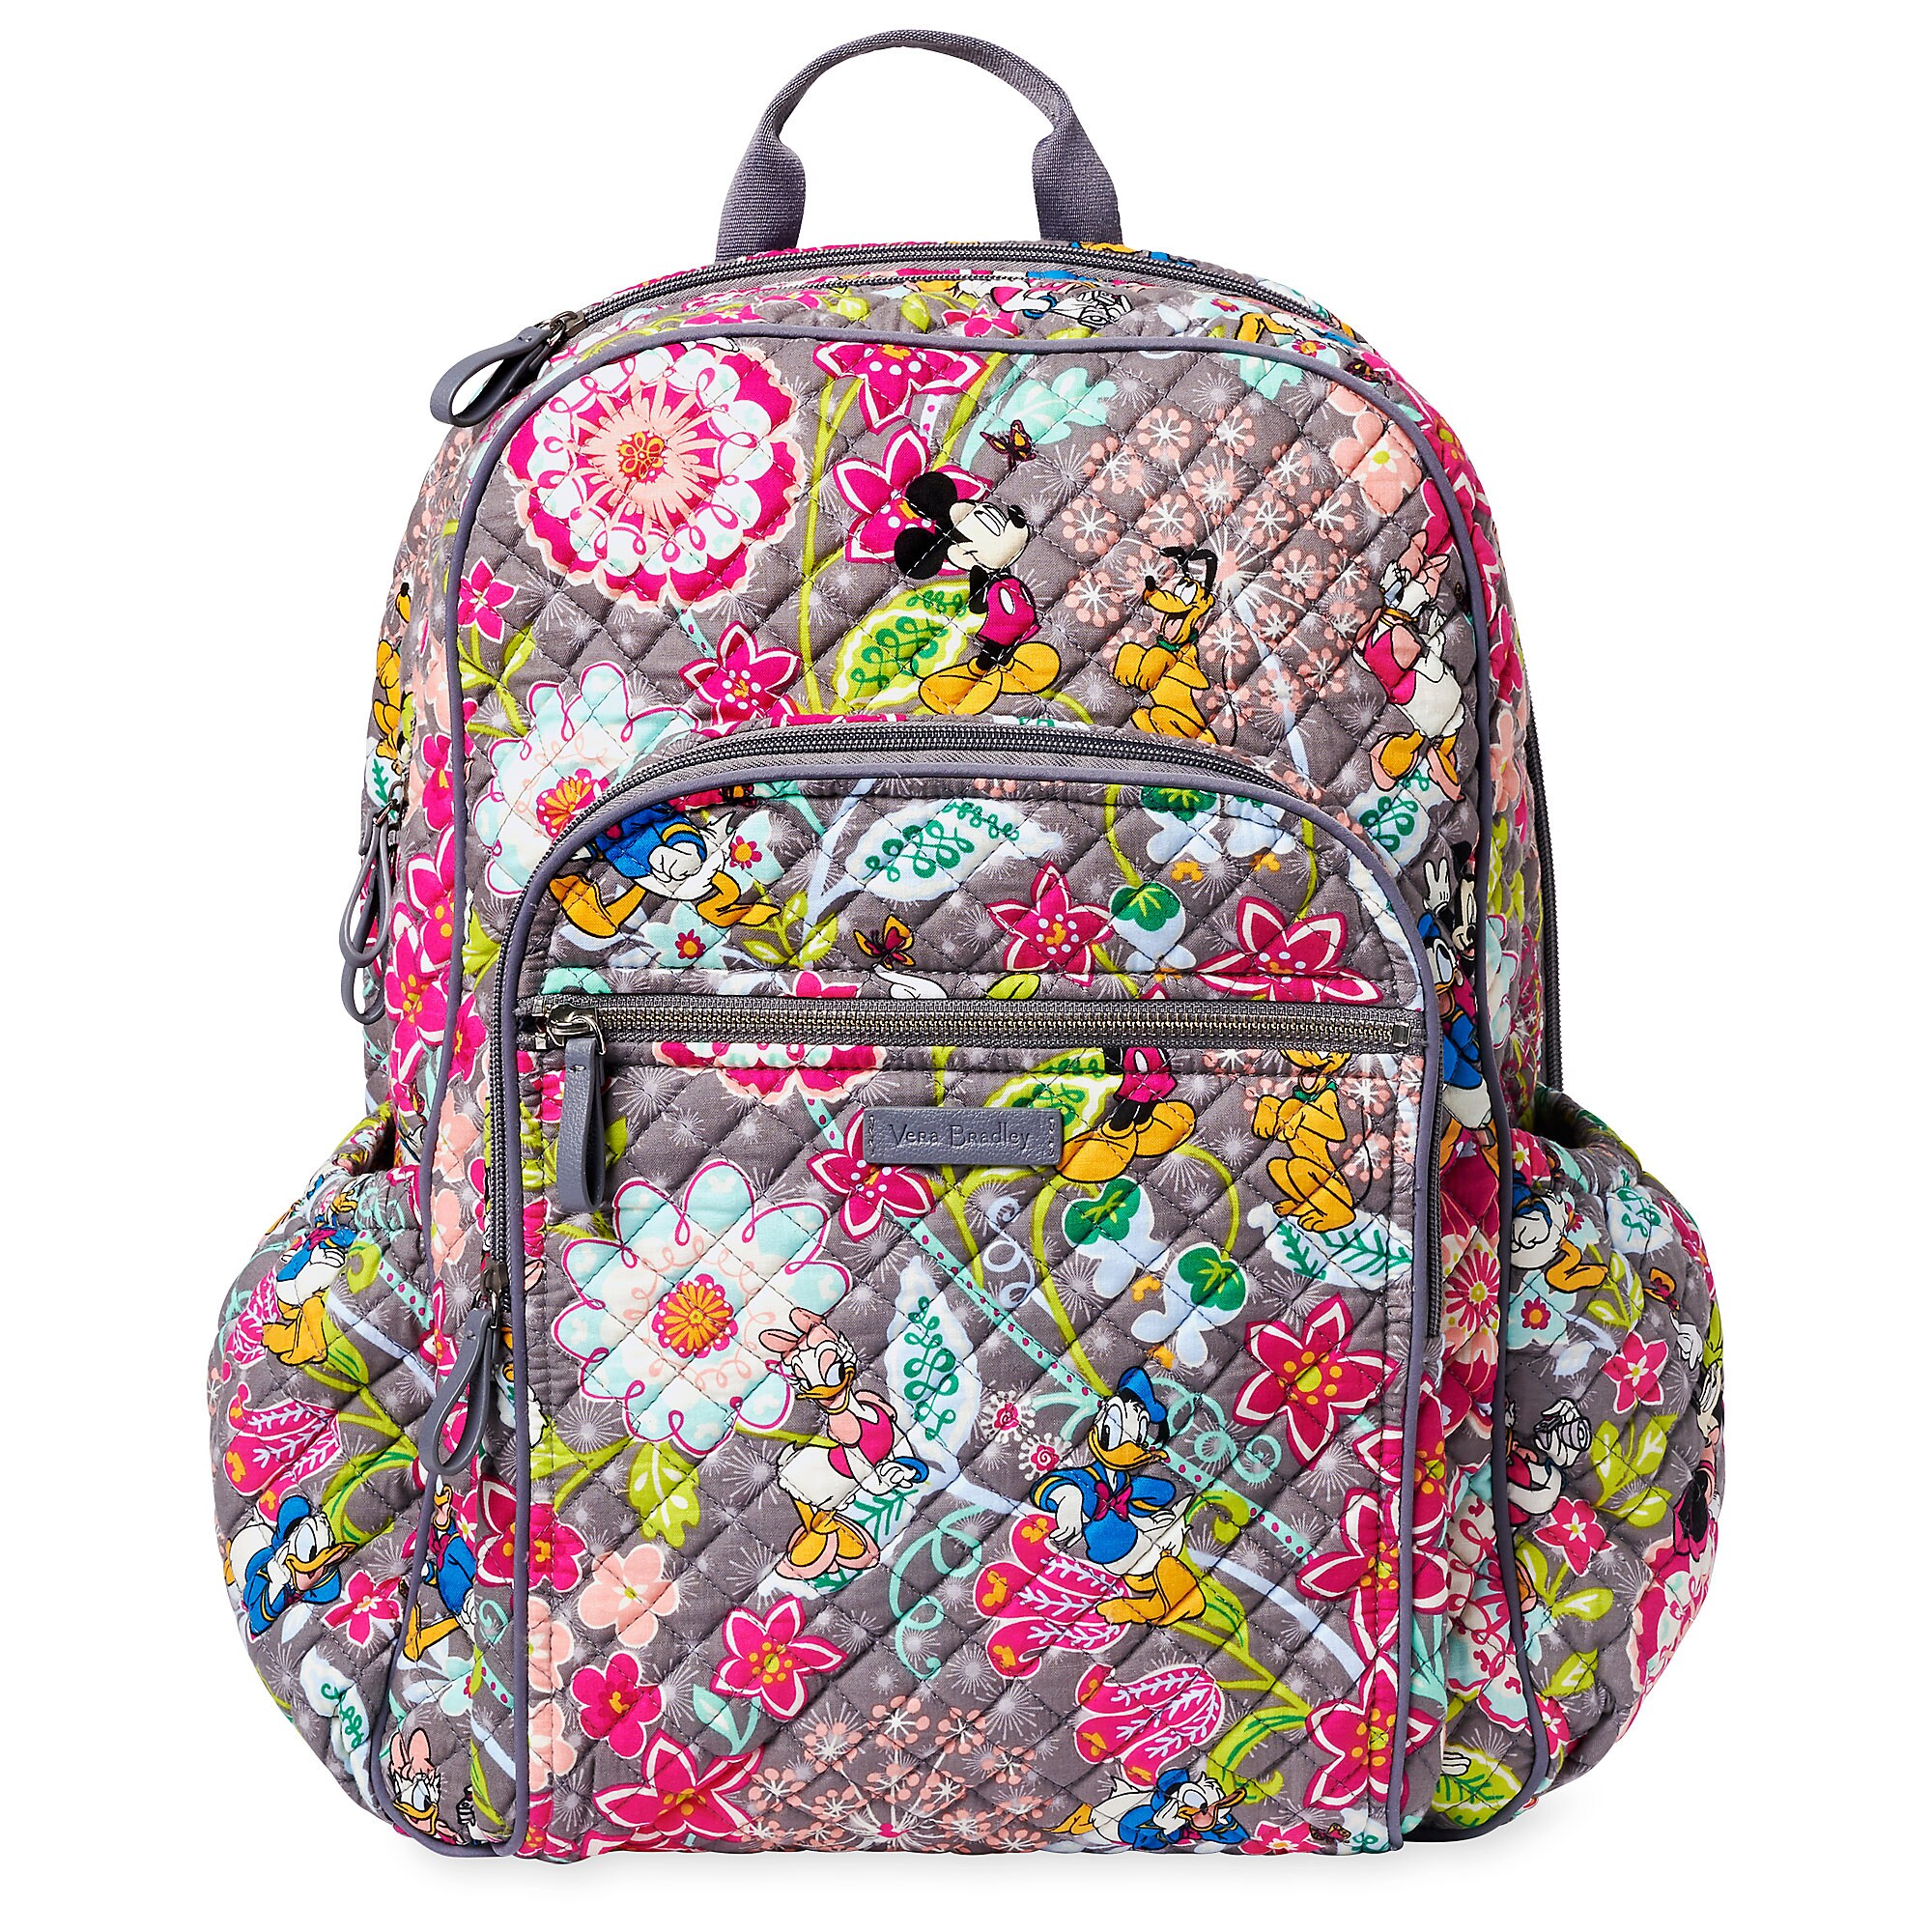 Mickey Mouse and Friends Campus Backpack by Vera Bradley